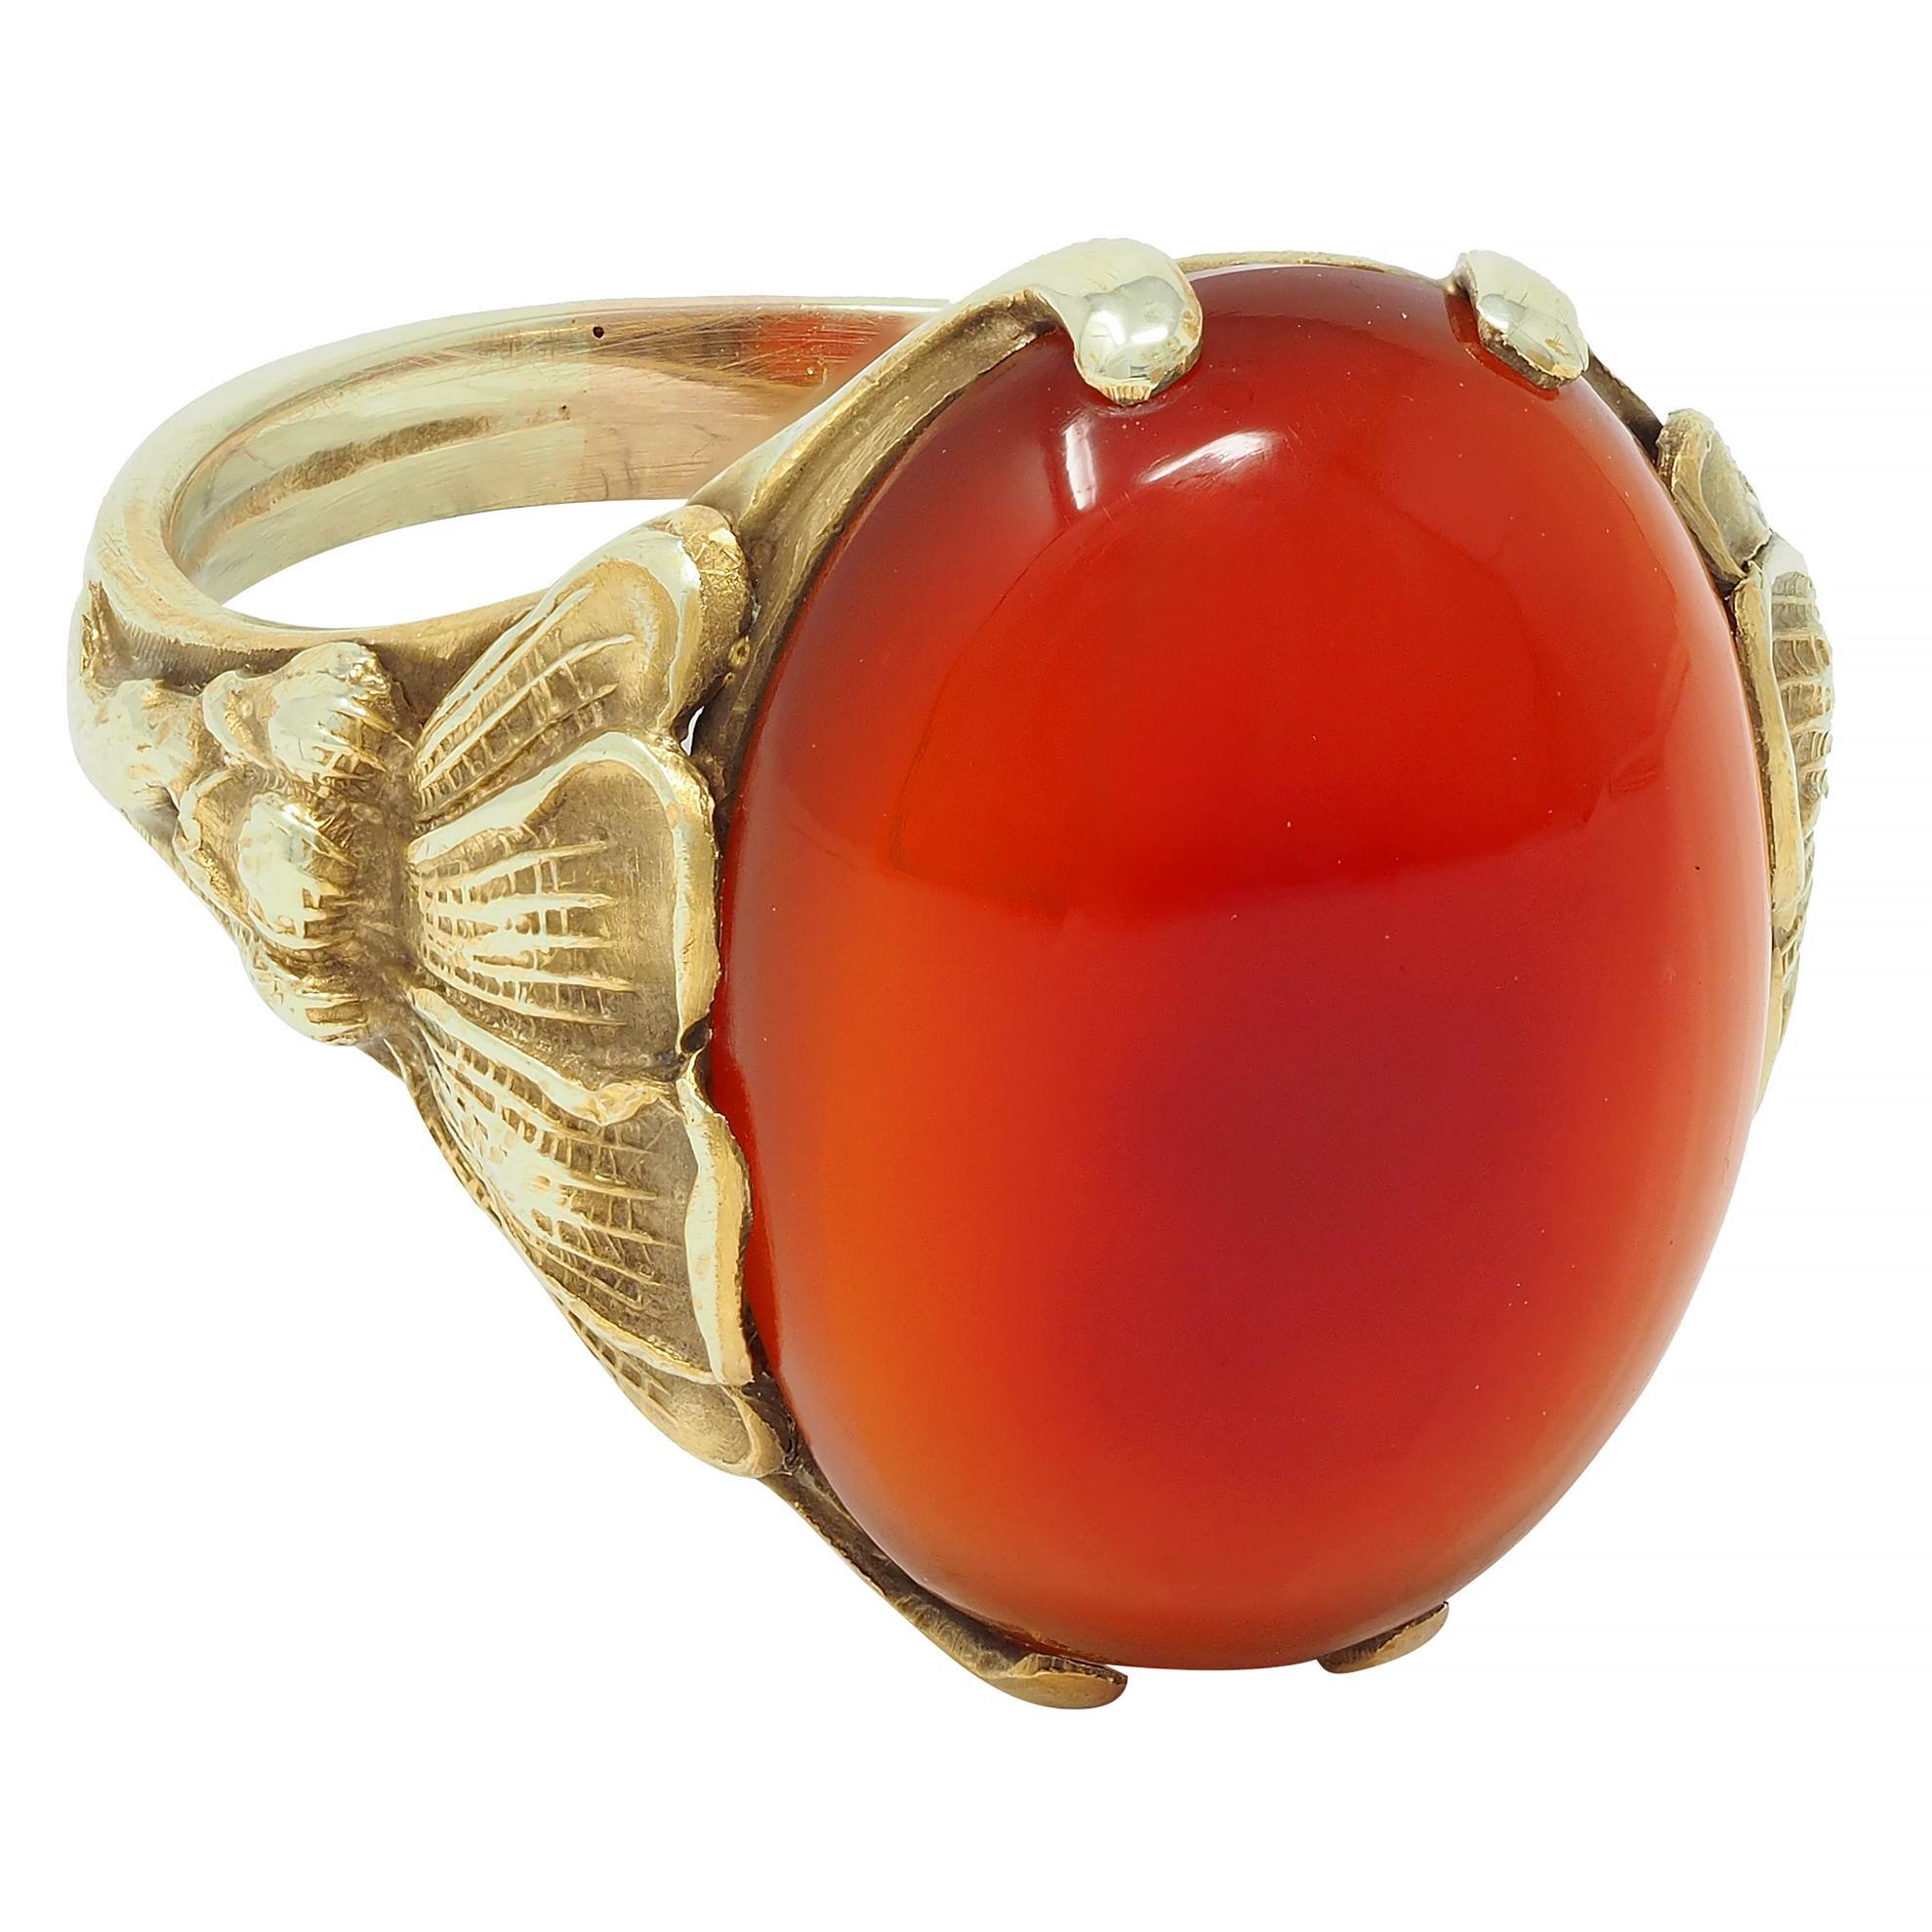 Centering an oval-shaped carnelian cabochon measuring 12.0 x 16.0 mm 
Translucent orangey red in color with medium saturation 
Prong set and flanked by highly rendered shoulders
Depicting stylized poppy flowers with engraved texture
Stamped for 14